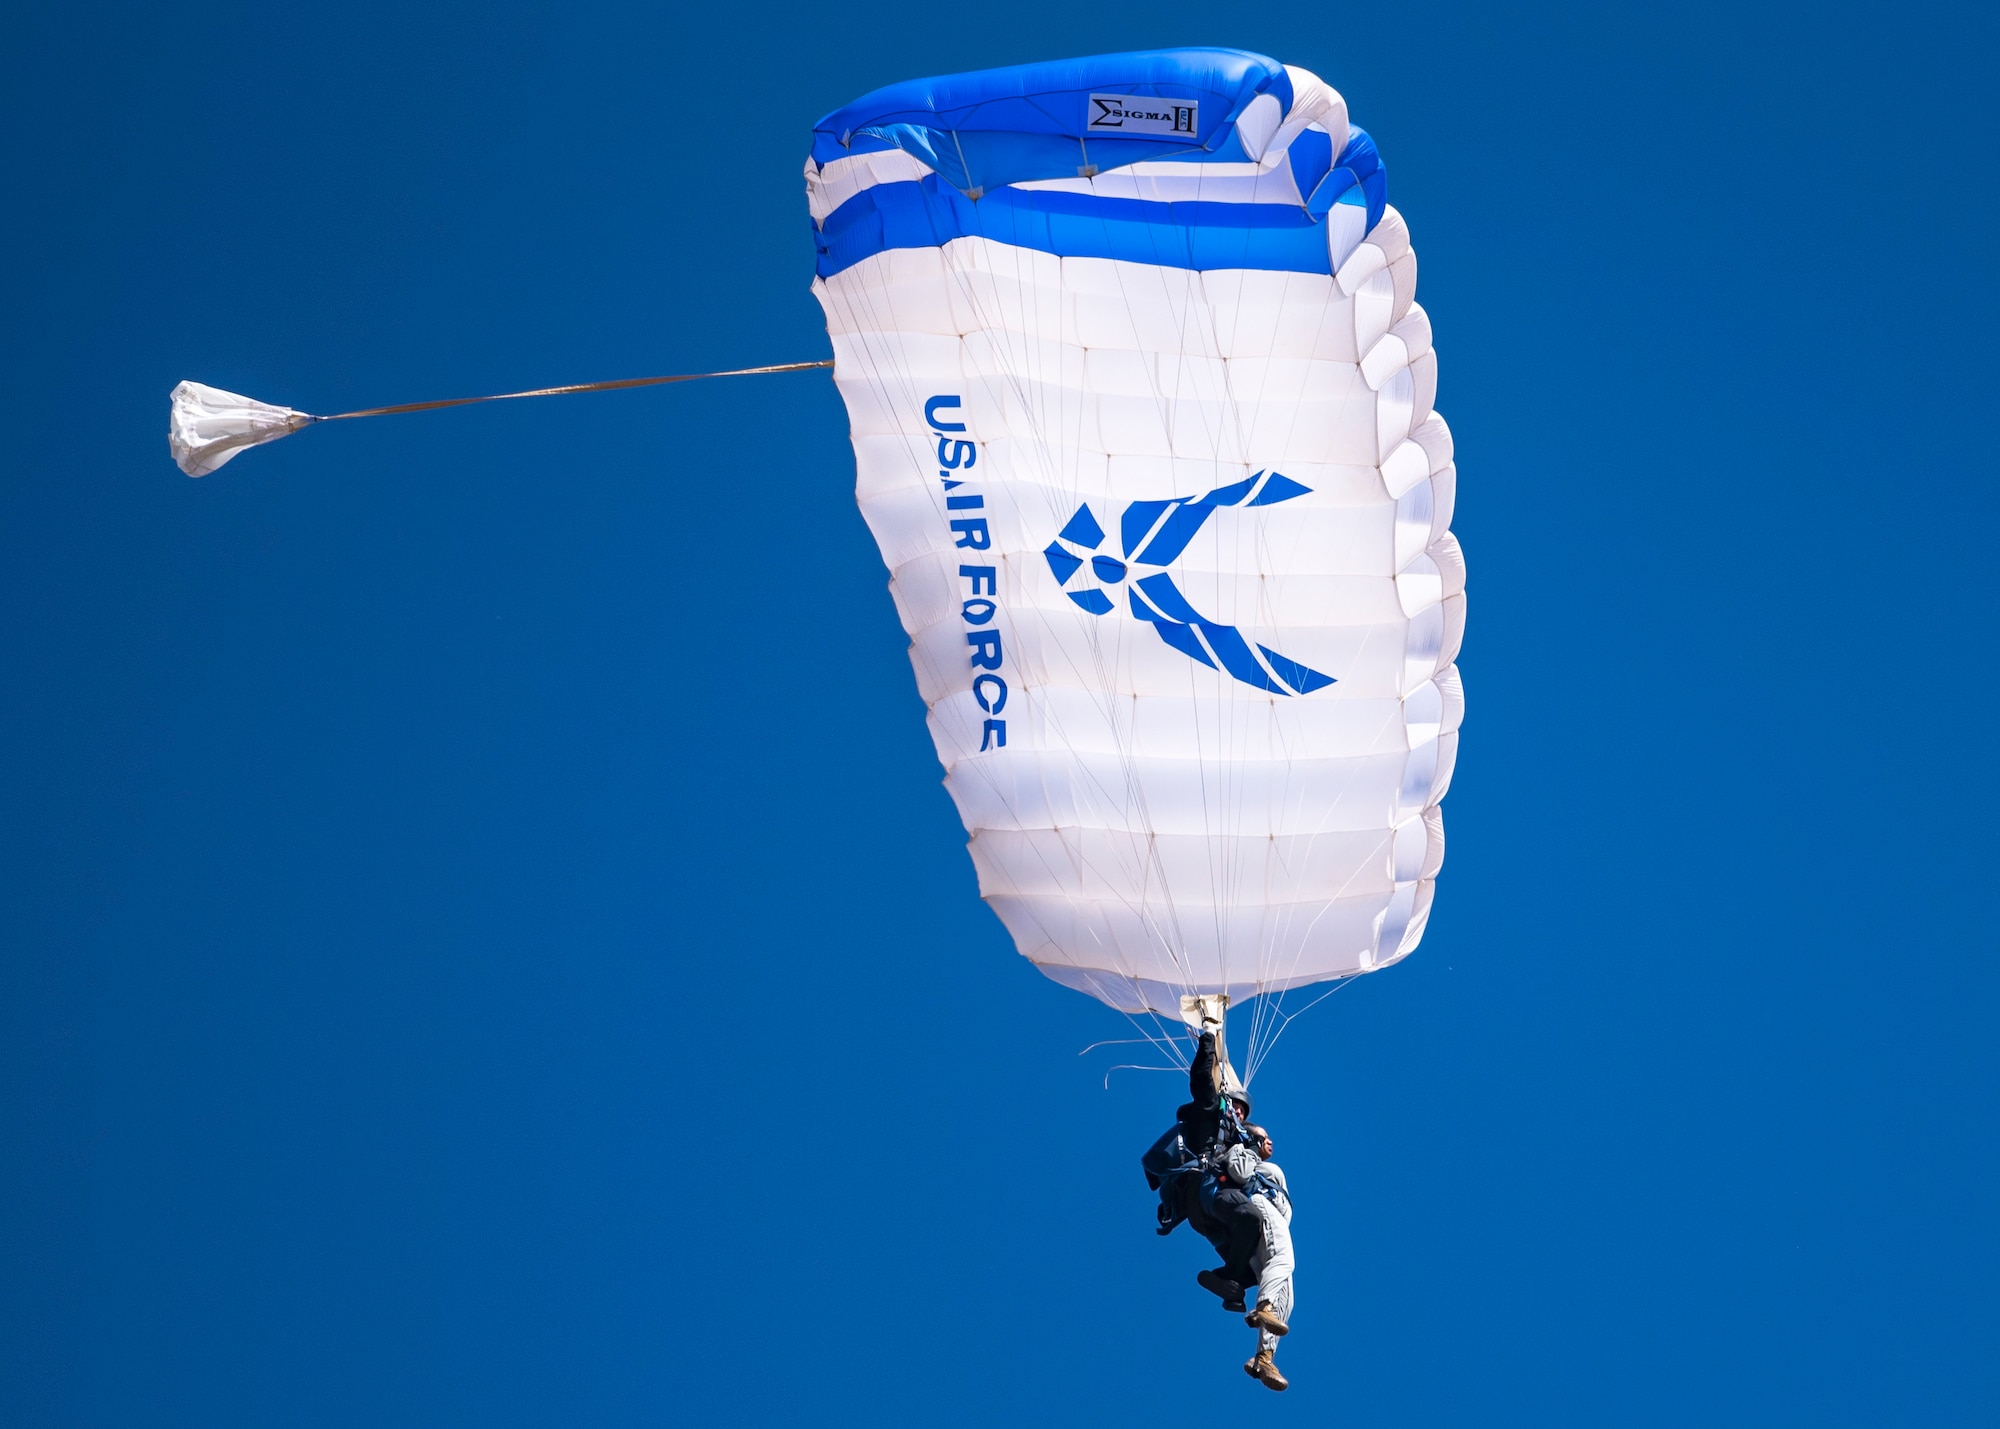 A U.S. Air Force Academy Wings of Blue parachute team member and Chief Master Sgt. Diena Mosely, 82nd Training Wing command chief, glide in a parachute during the Sheppard Air Force Base Guardians of Freedom Open House and Air Show at Sheppard AFB, Texas, Oct. 28, 2019. The Wings of Blue demonstration team travels across the country to air shows, sporting events and other venues to represent the Air Force in precision parachuting. Other than traveling, their primary mission is to run the Air Force's Basic Freefall Parachuting course, known as Airmanship 490. (U.S. Air Force photo by Airman 1st Class Pedro Tenorio)